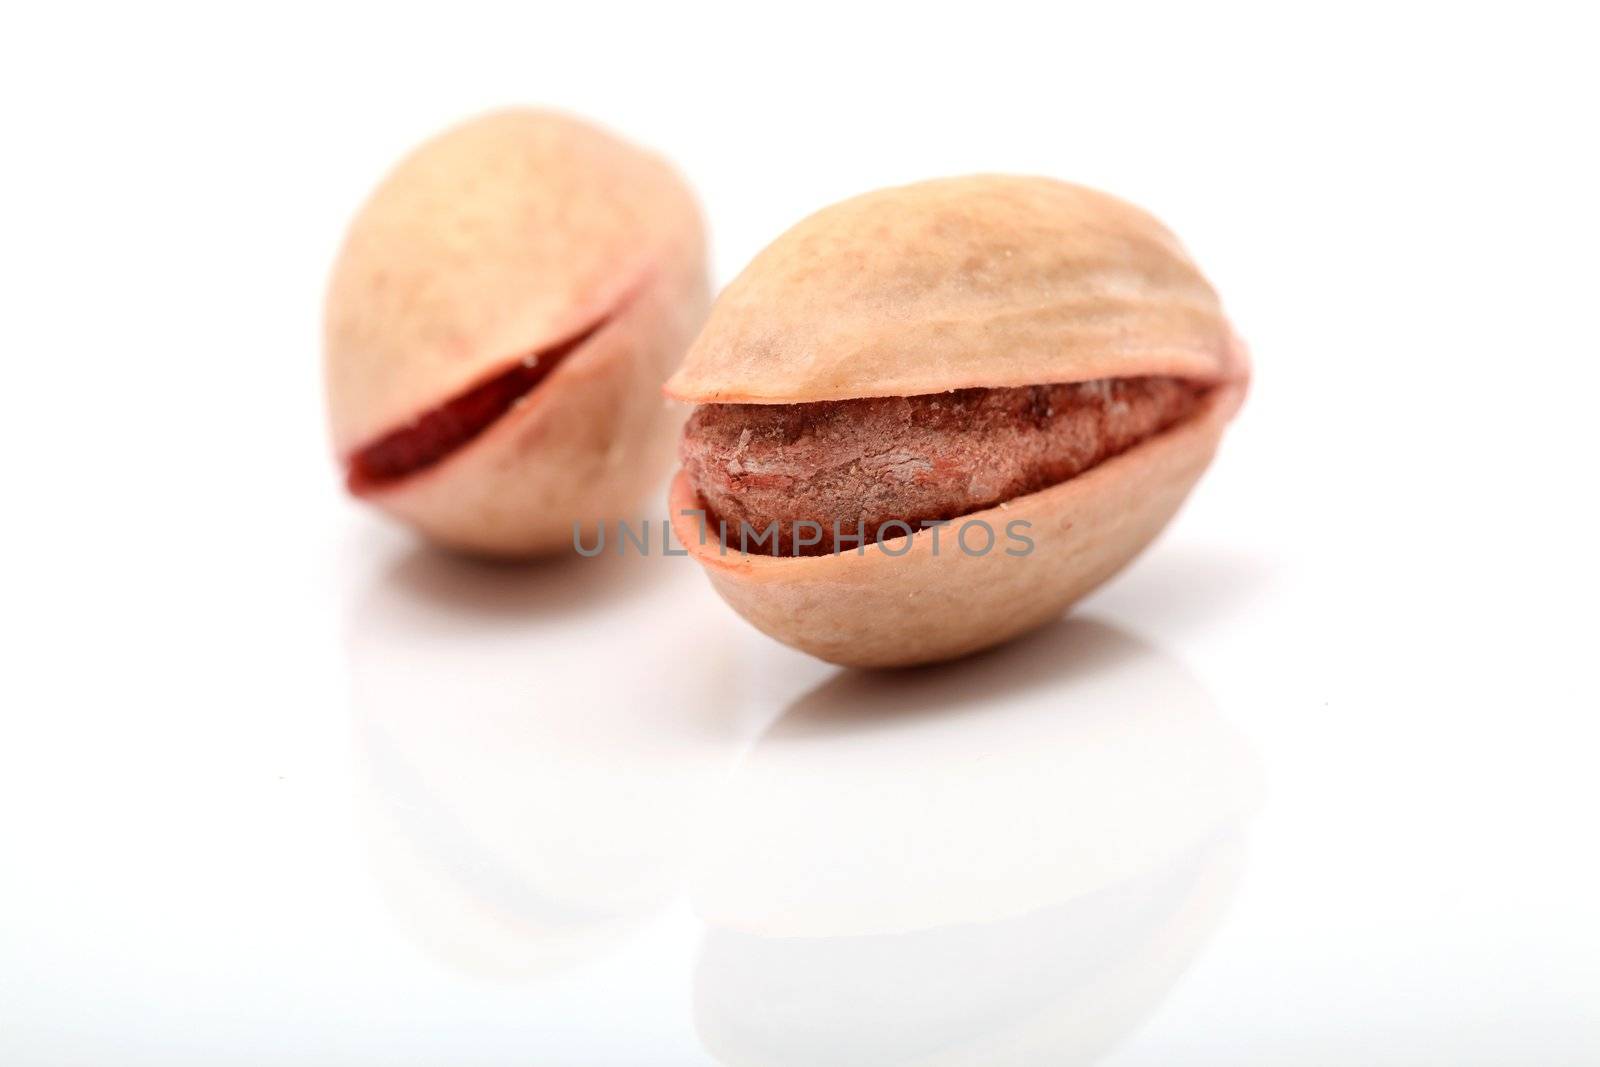 two pistachios closeup detail isolated on white background with copyspace